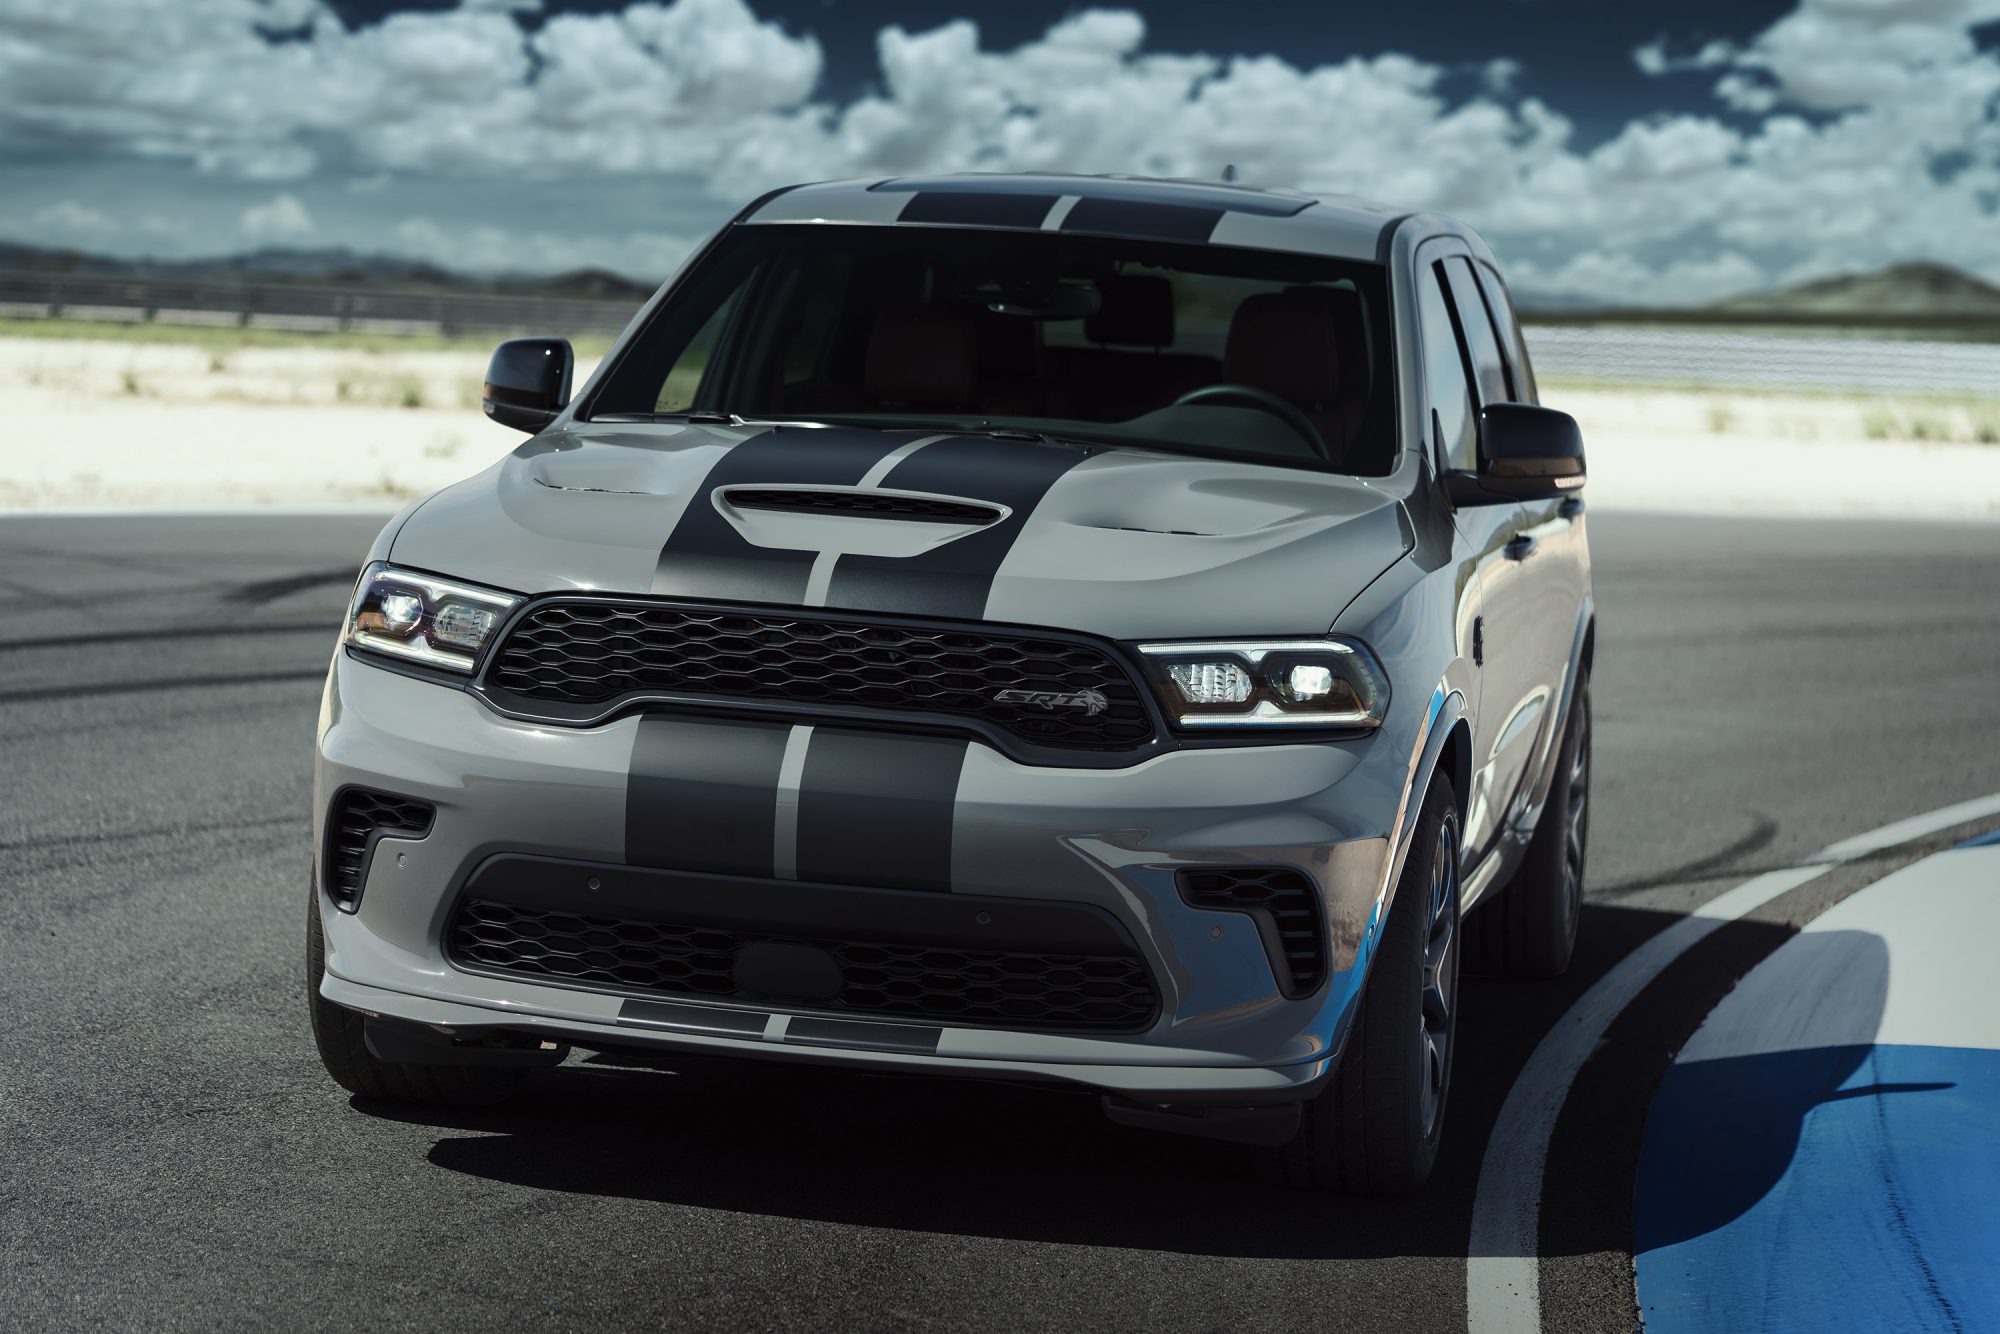 Catch It While You Can: Dodge Opening Dealer Orders for New 2021 Durango SRT<sup>®</sup> Hellcat — the Most Powerful SUV Ever